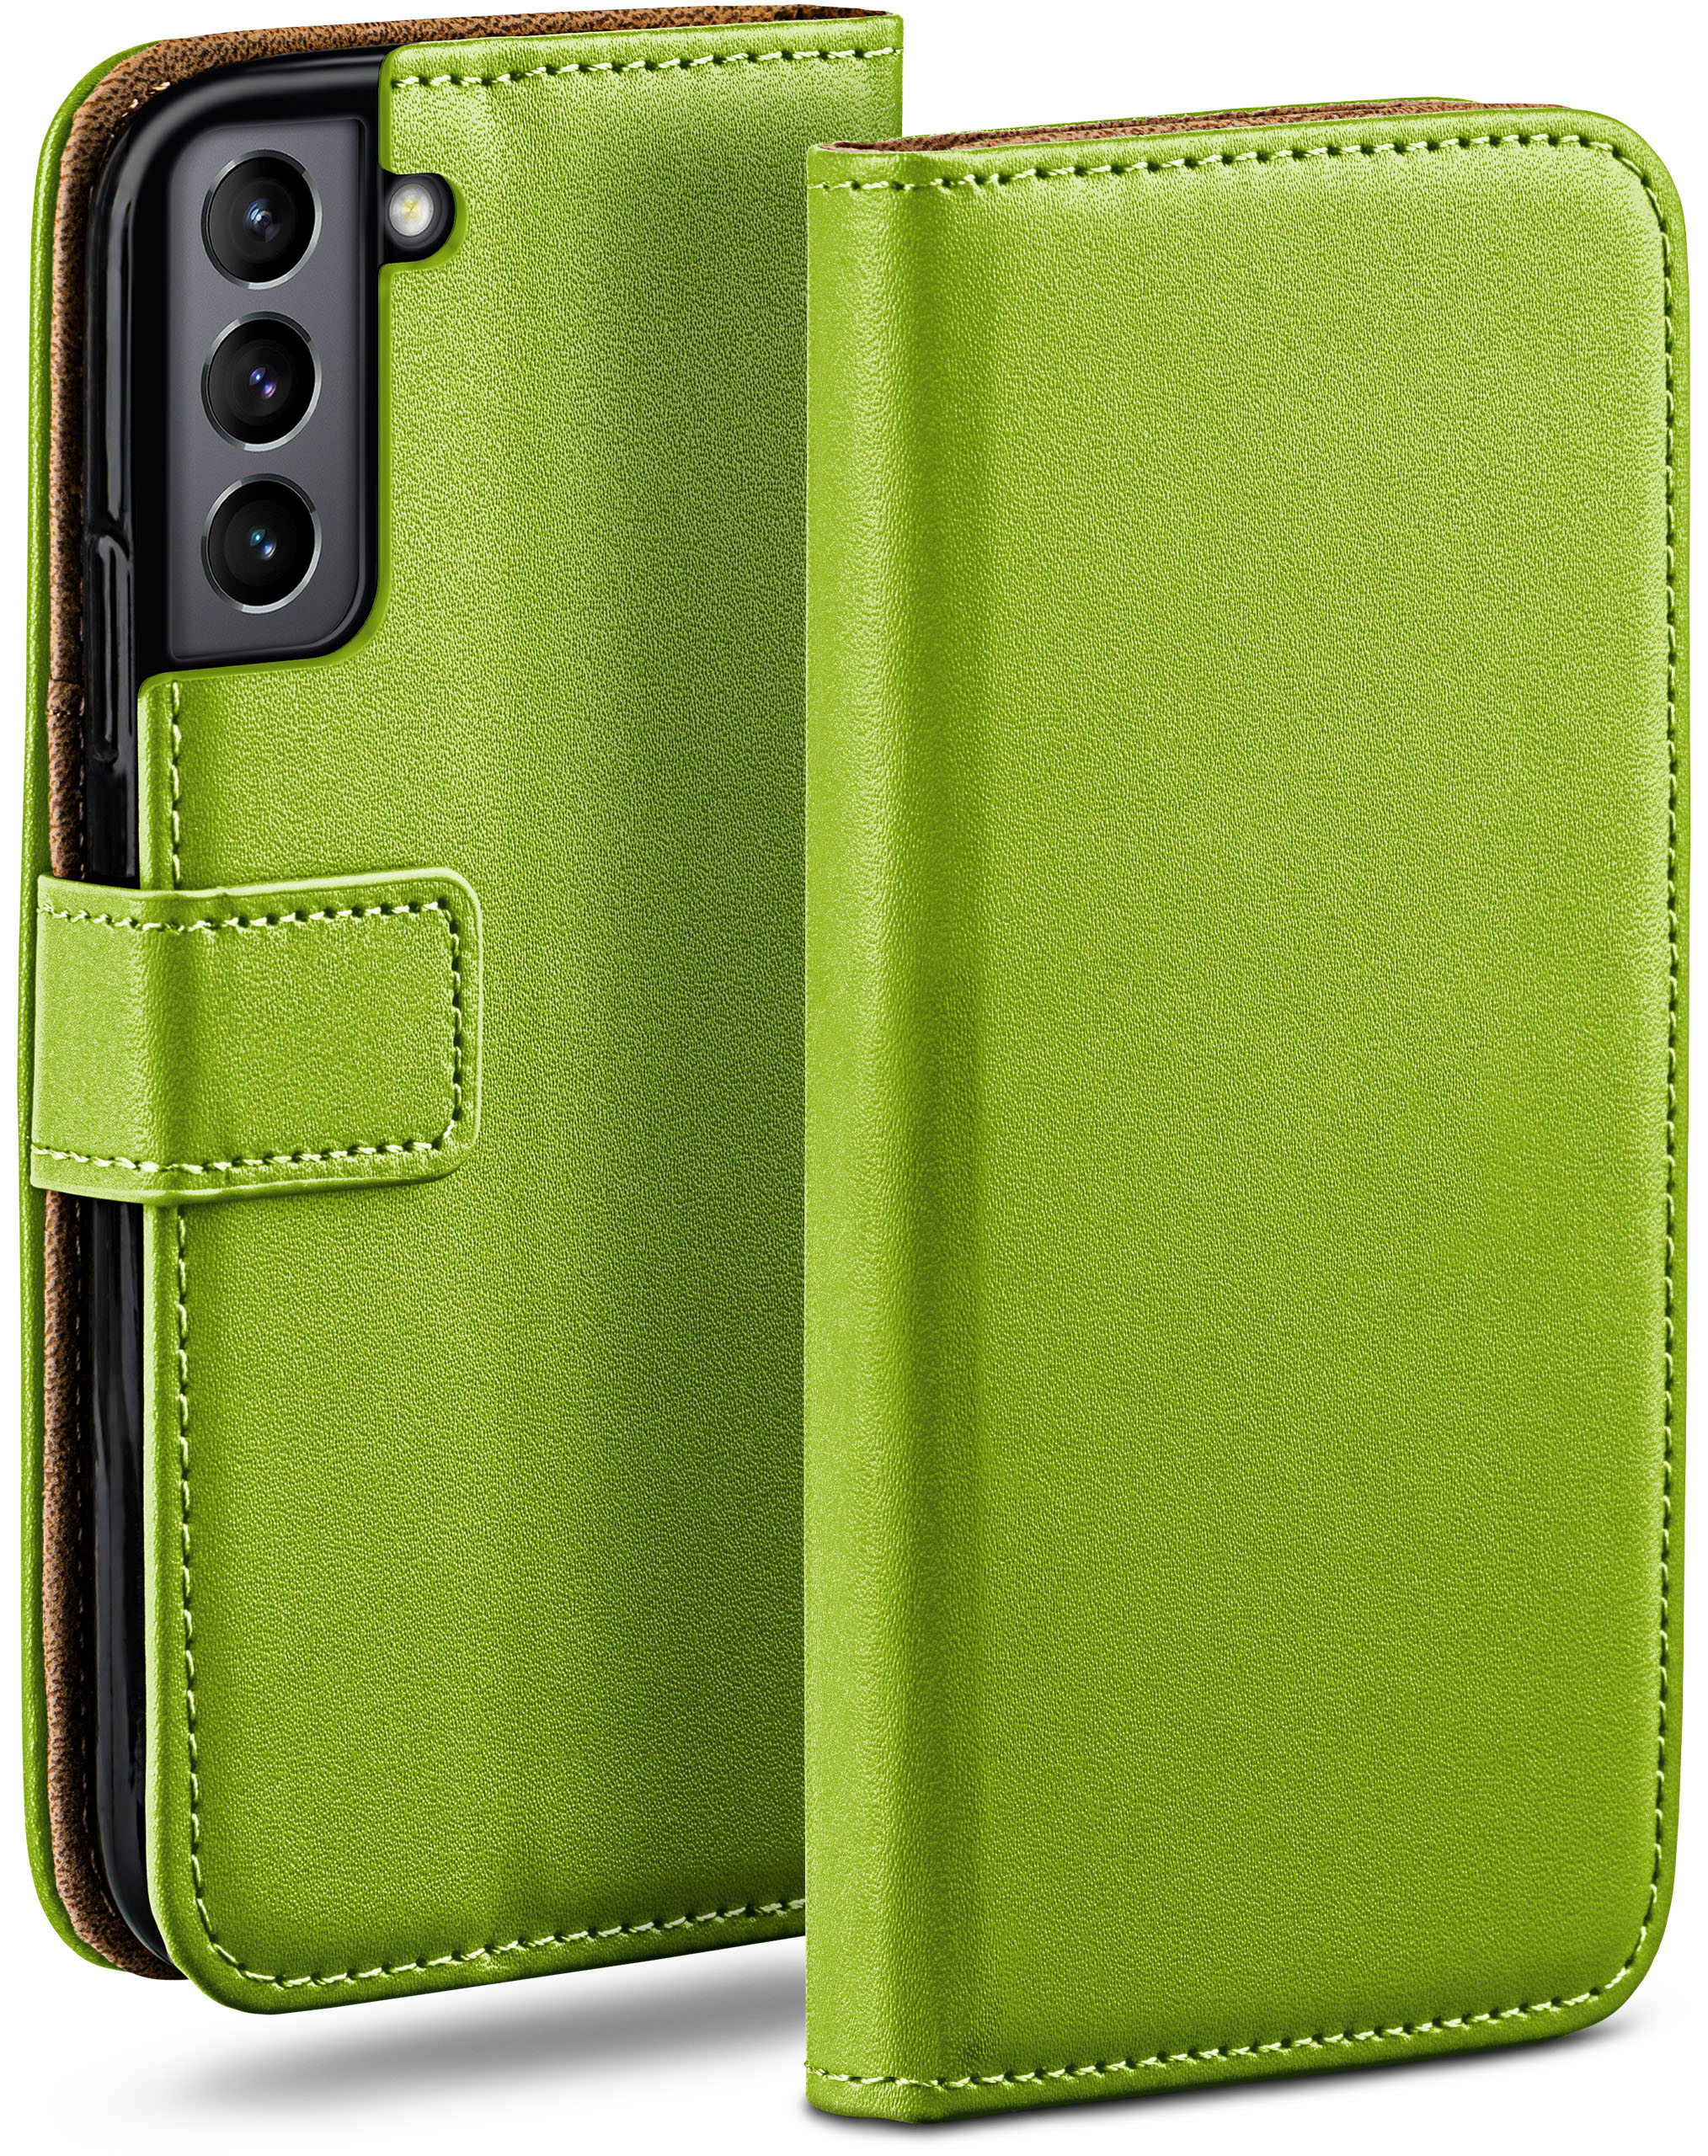 Samsung, Bookcover, MOEX Lime-Green Case, Galaxy S21 5G, FE Book